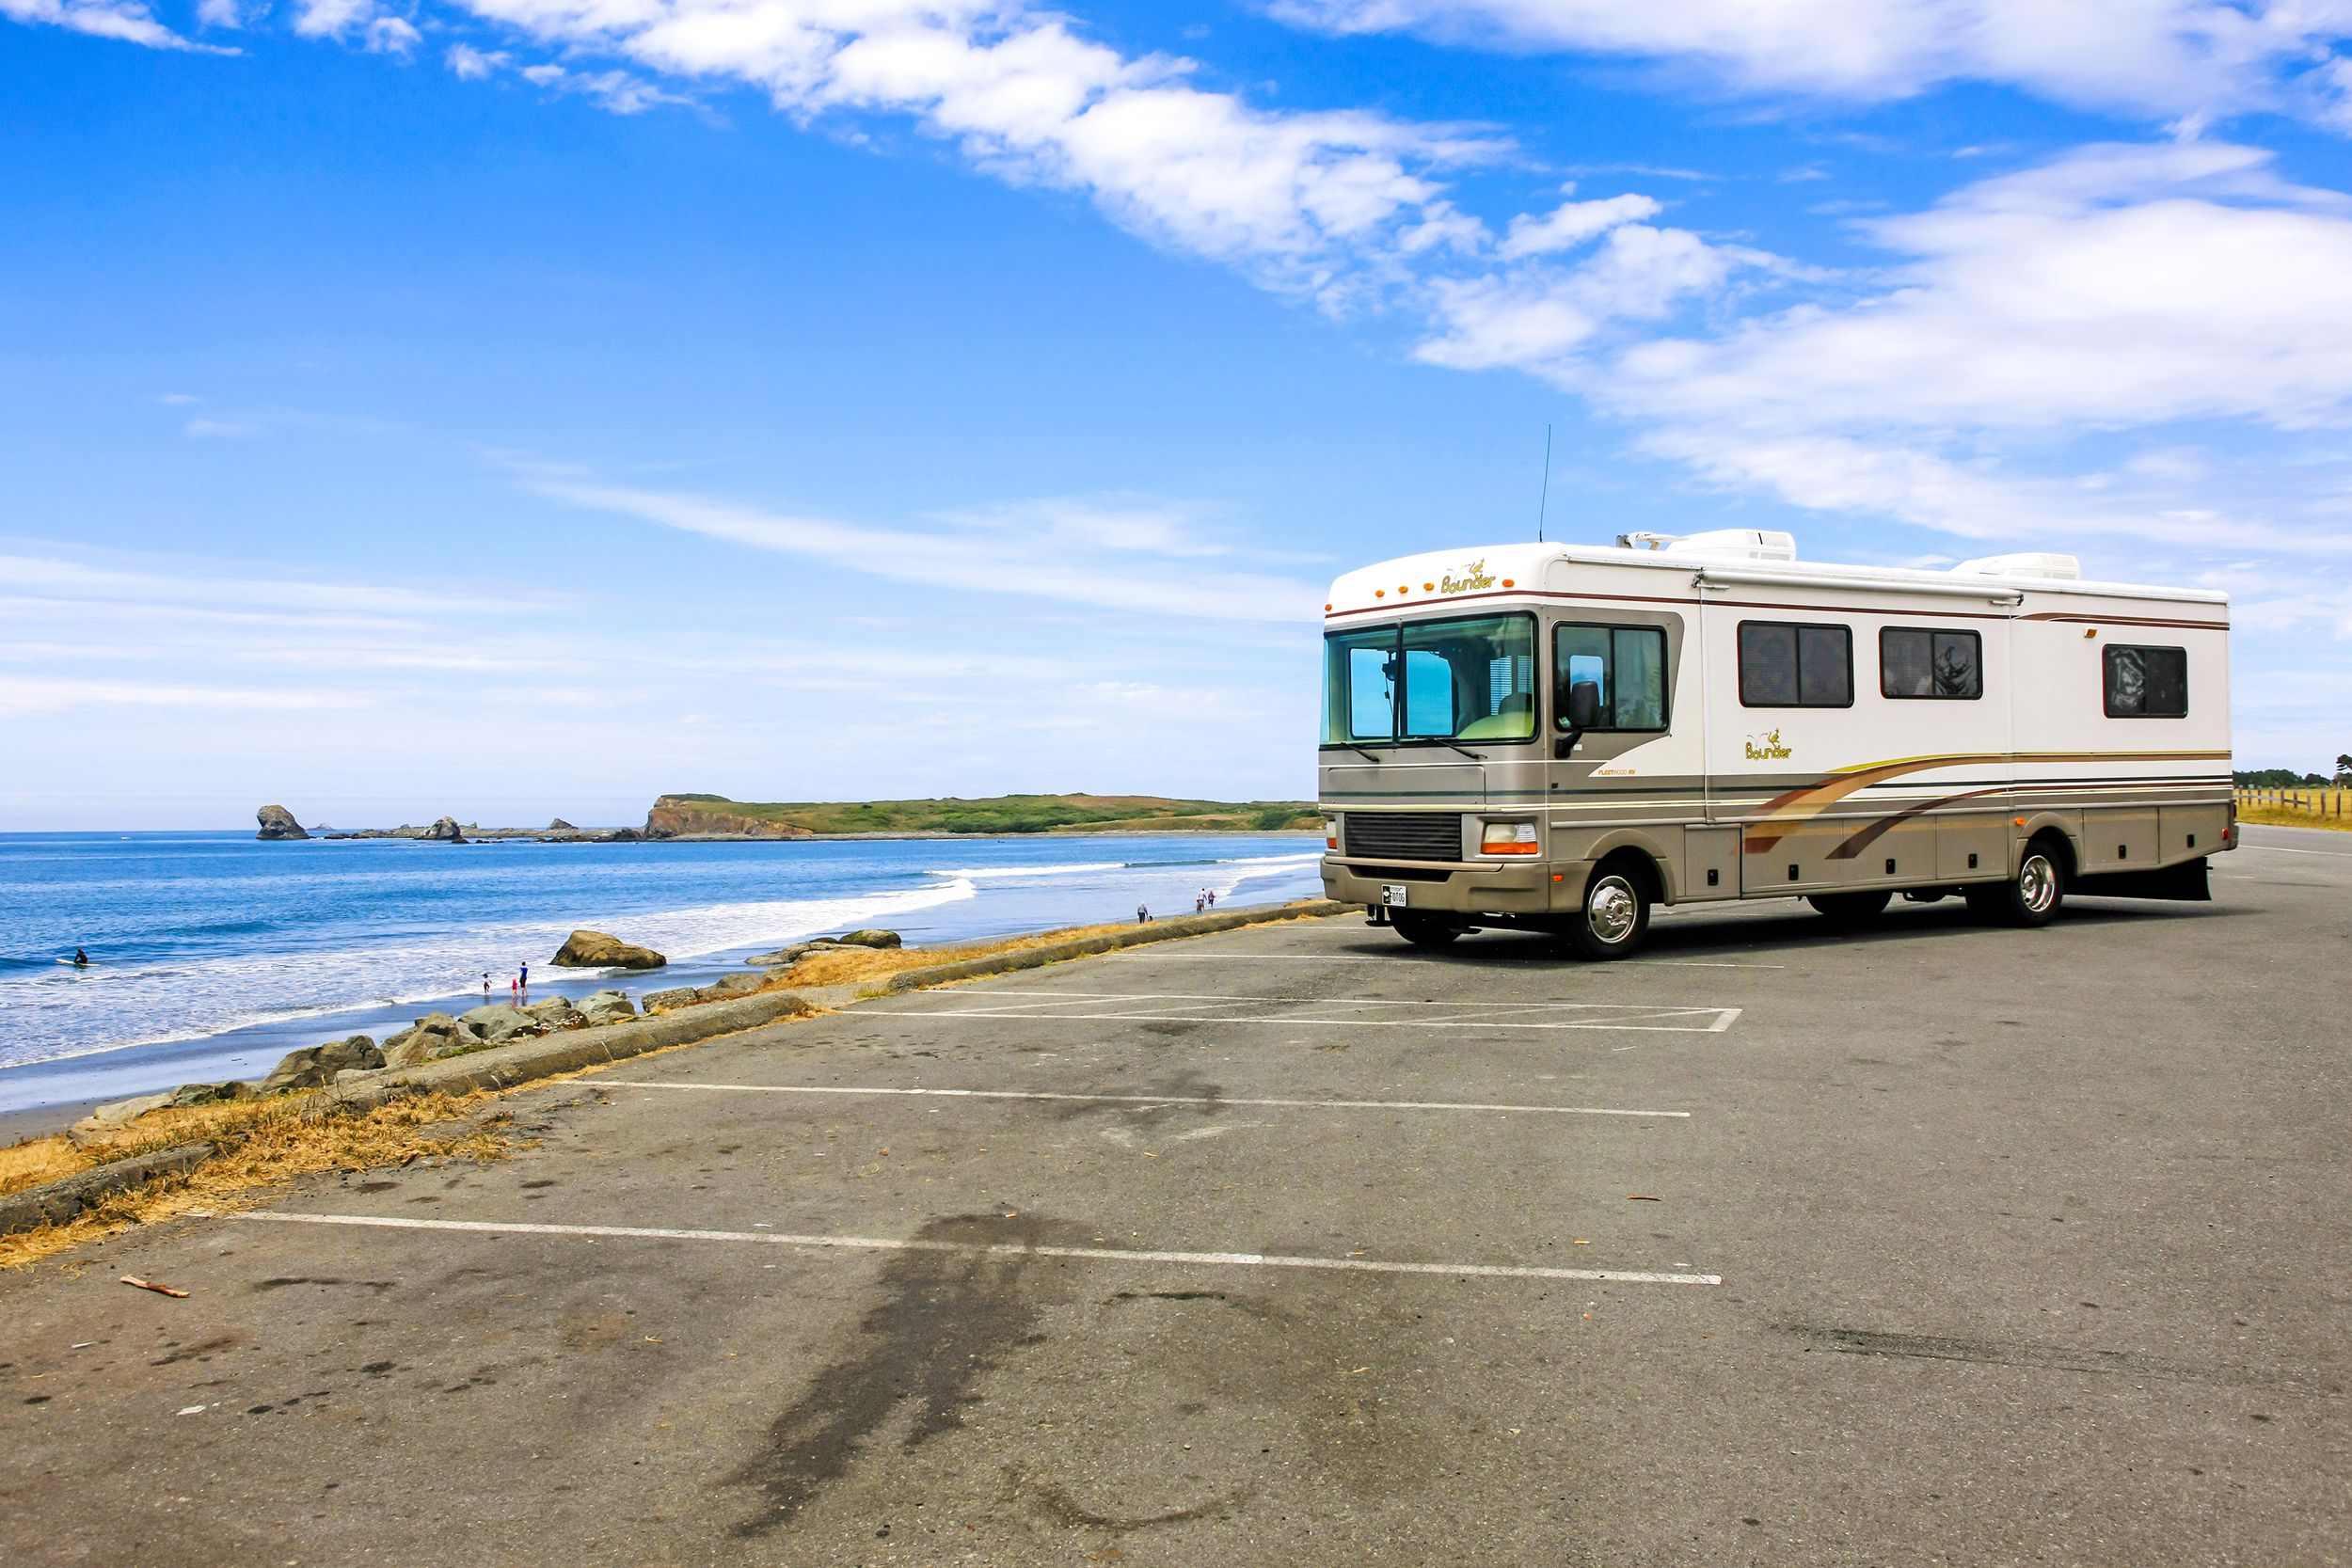 <p>Motorhomes are a one-and-done vehicle. When you find the one that suits your needs, all that’s left to do is <a href="https://blog.cheapism.com/coronavirus-road-trip/">plan a trip</a>. “A lot of people prefer the overall package of an RV because it’s built-in and ready to go,” says Michael Lowe, CEO of <a href="https://carpassionate.com">Car Passionate</a>. “It also allows people to make use of the ‘home’ aspect of the motorhome while staying in the same space as the driver.” </p>